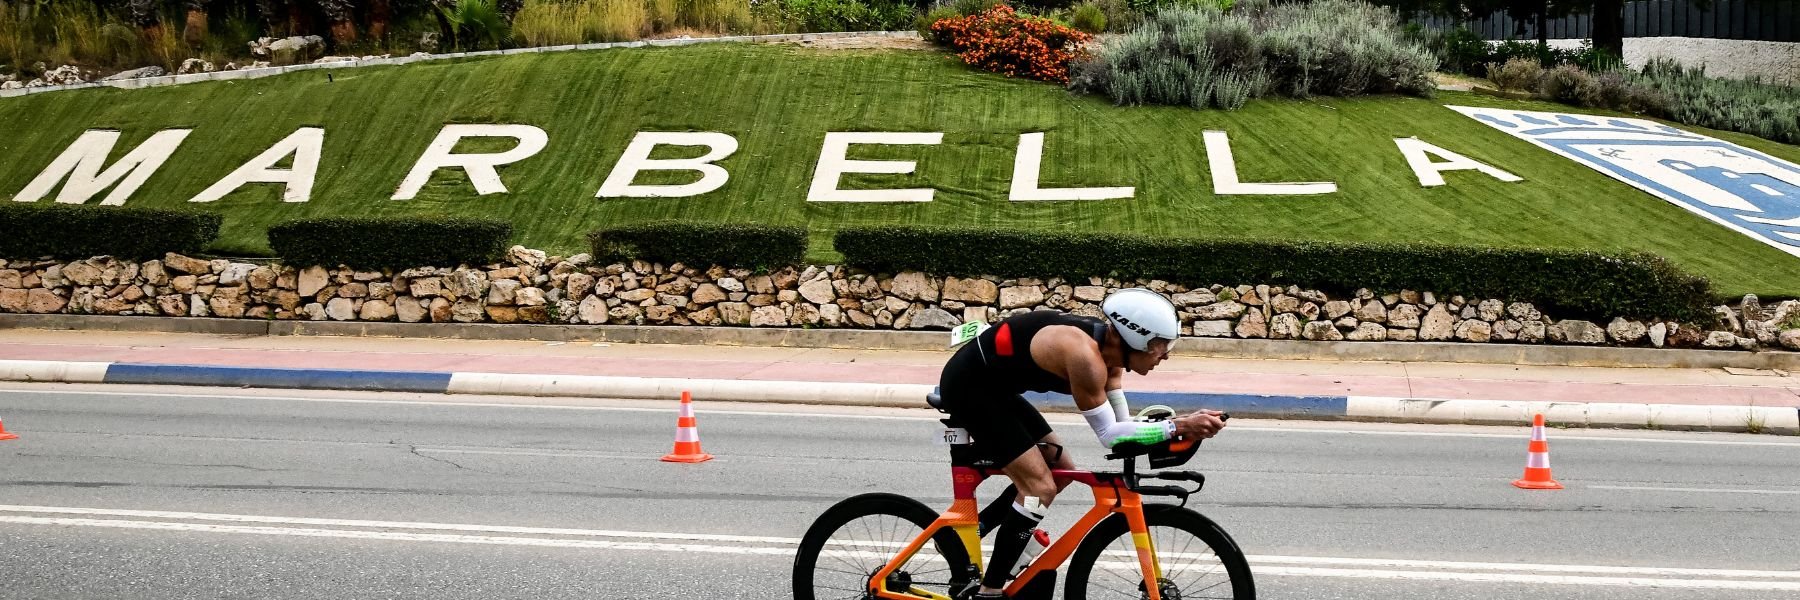 Two athletes biking on a street with a small town of white houses located on a small green hill in the background at IRONMAN 70.3 Marbella